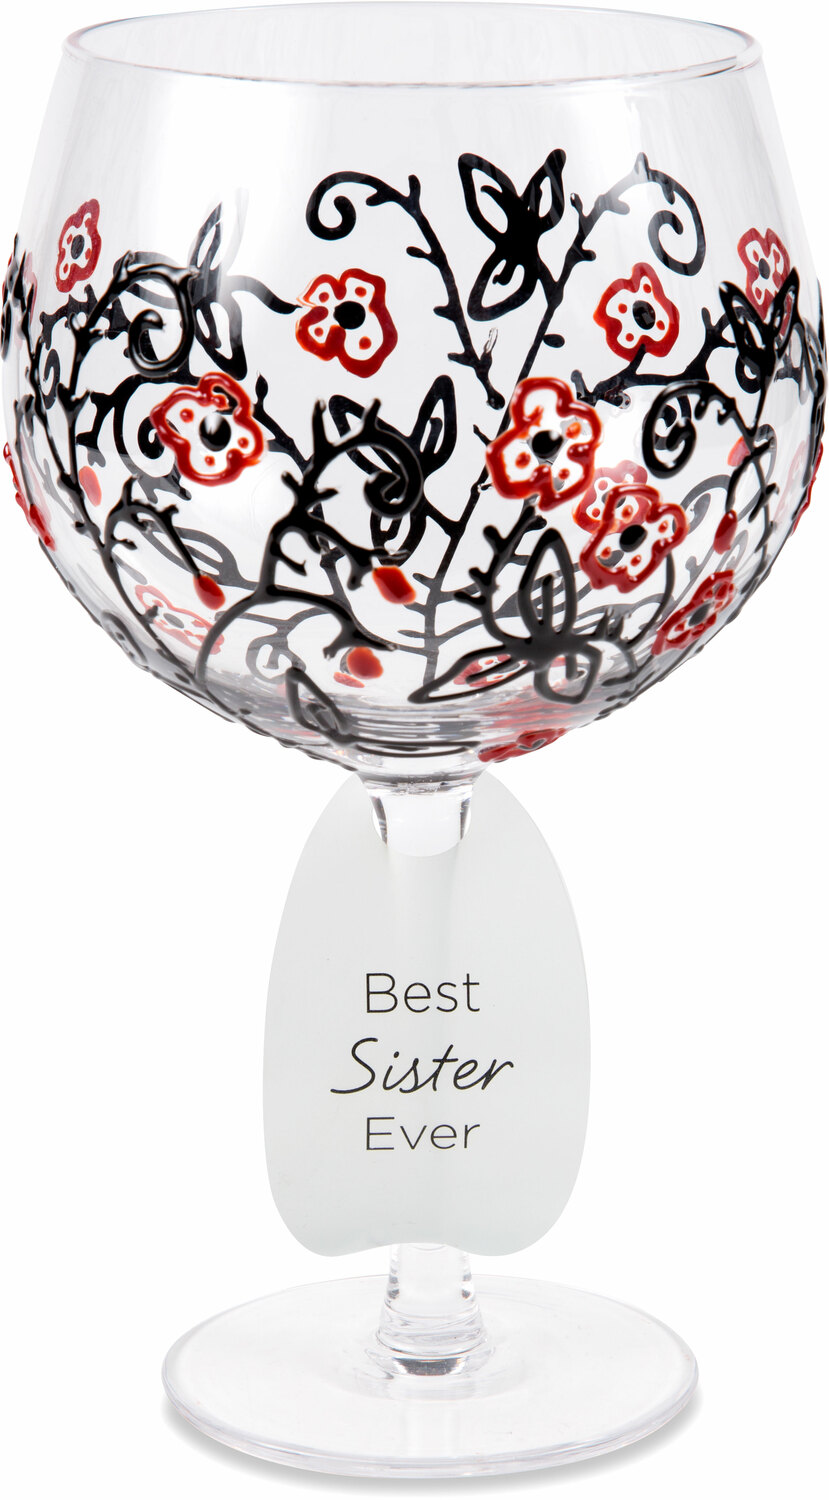 Red Flowers & Swirls by Sunny by Sue - Red Flowers & Swirls - 24 oz Hand Decorated Glass